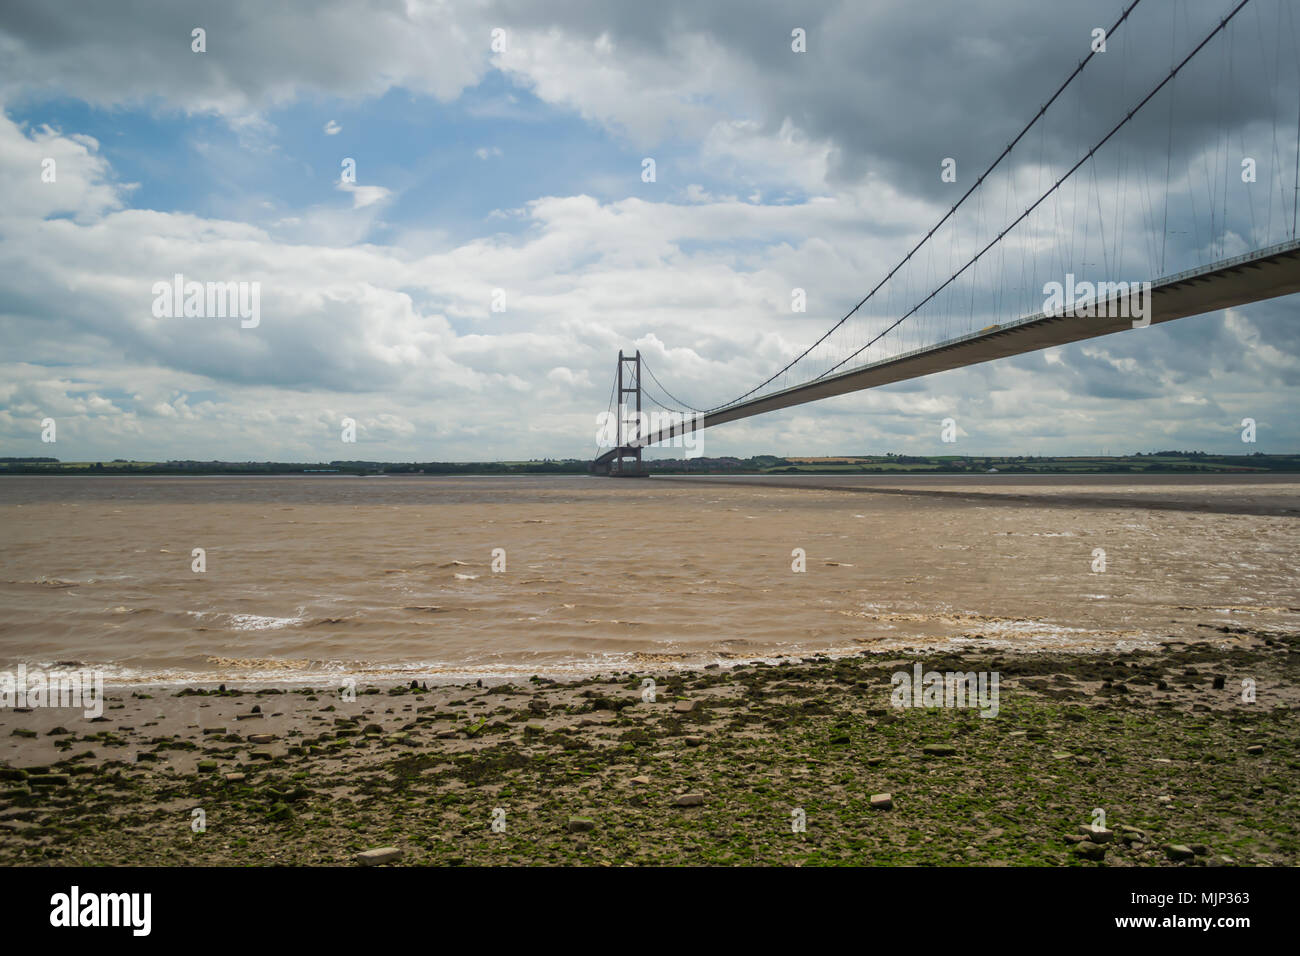 Standing on the shore of the humber viewing the humber bridge on a cloudy day Stock Photo